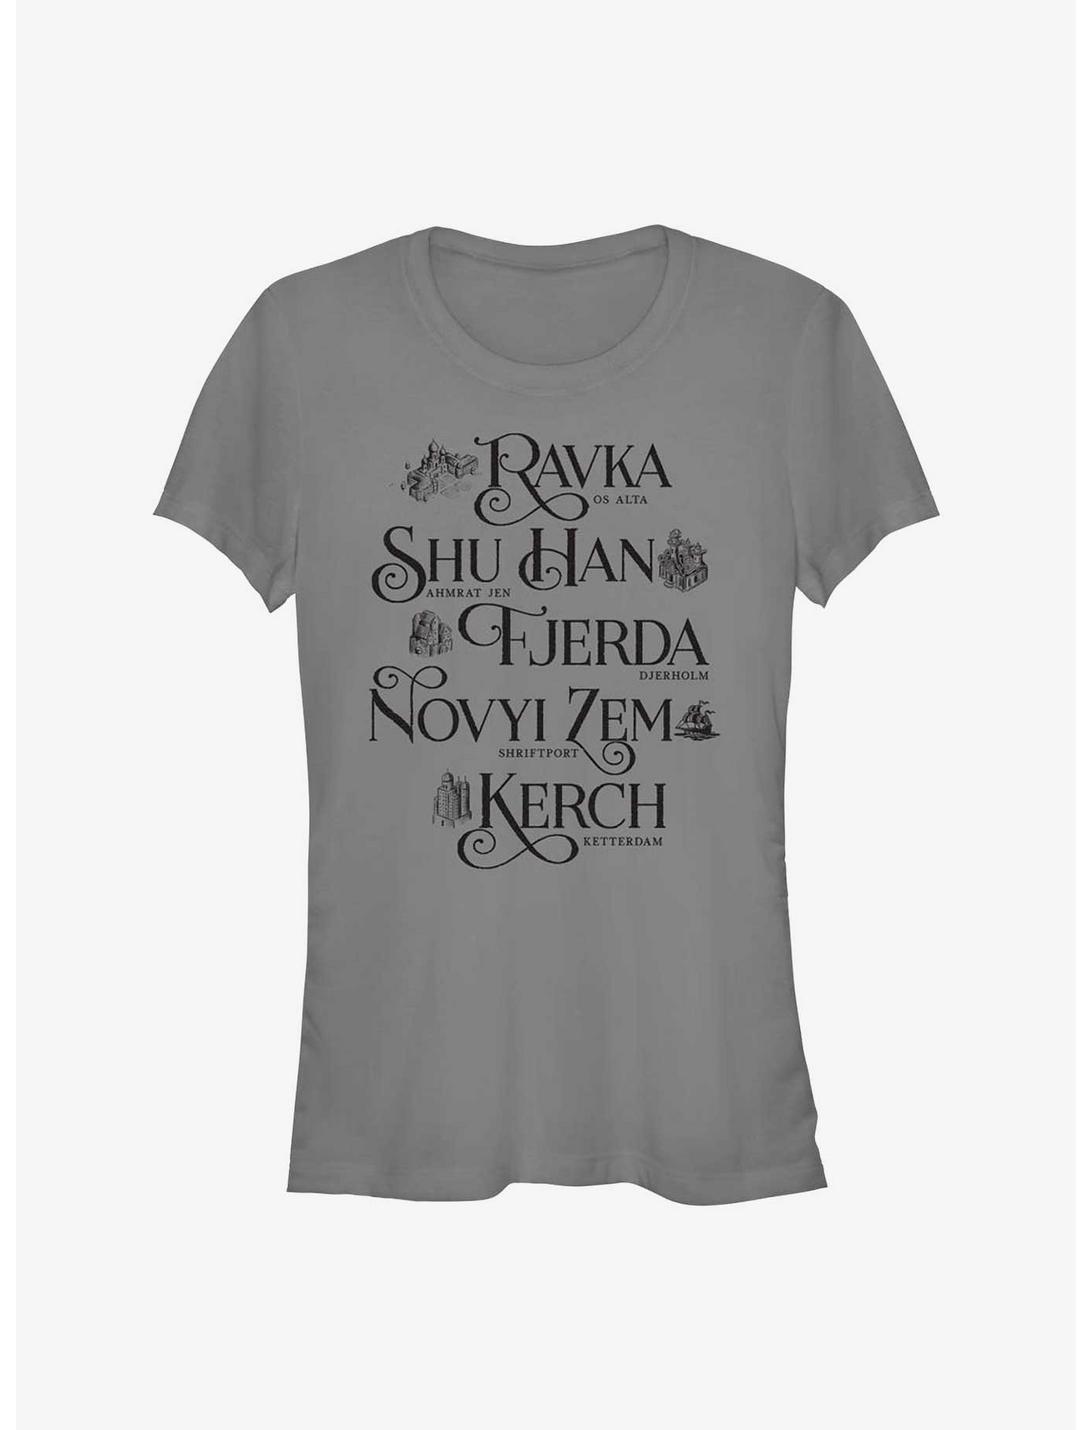 Shadow and Bone Many Lands Girls T-Shirt, CHARCOAL, hi-res